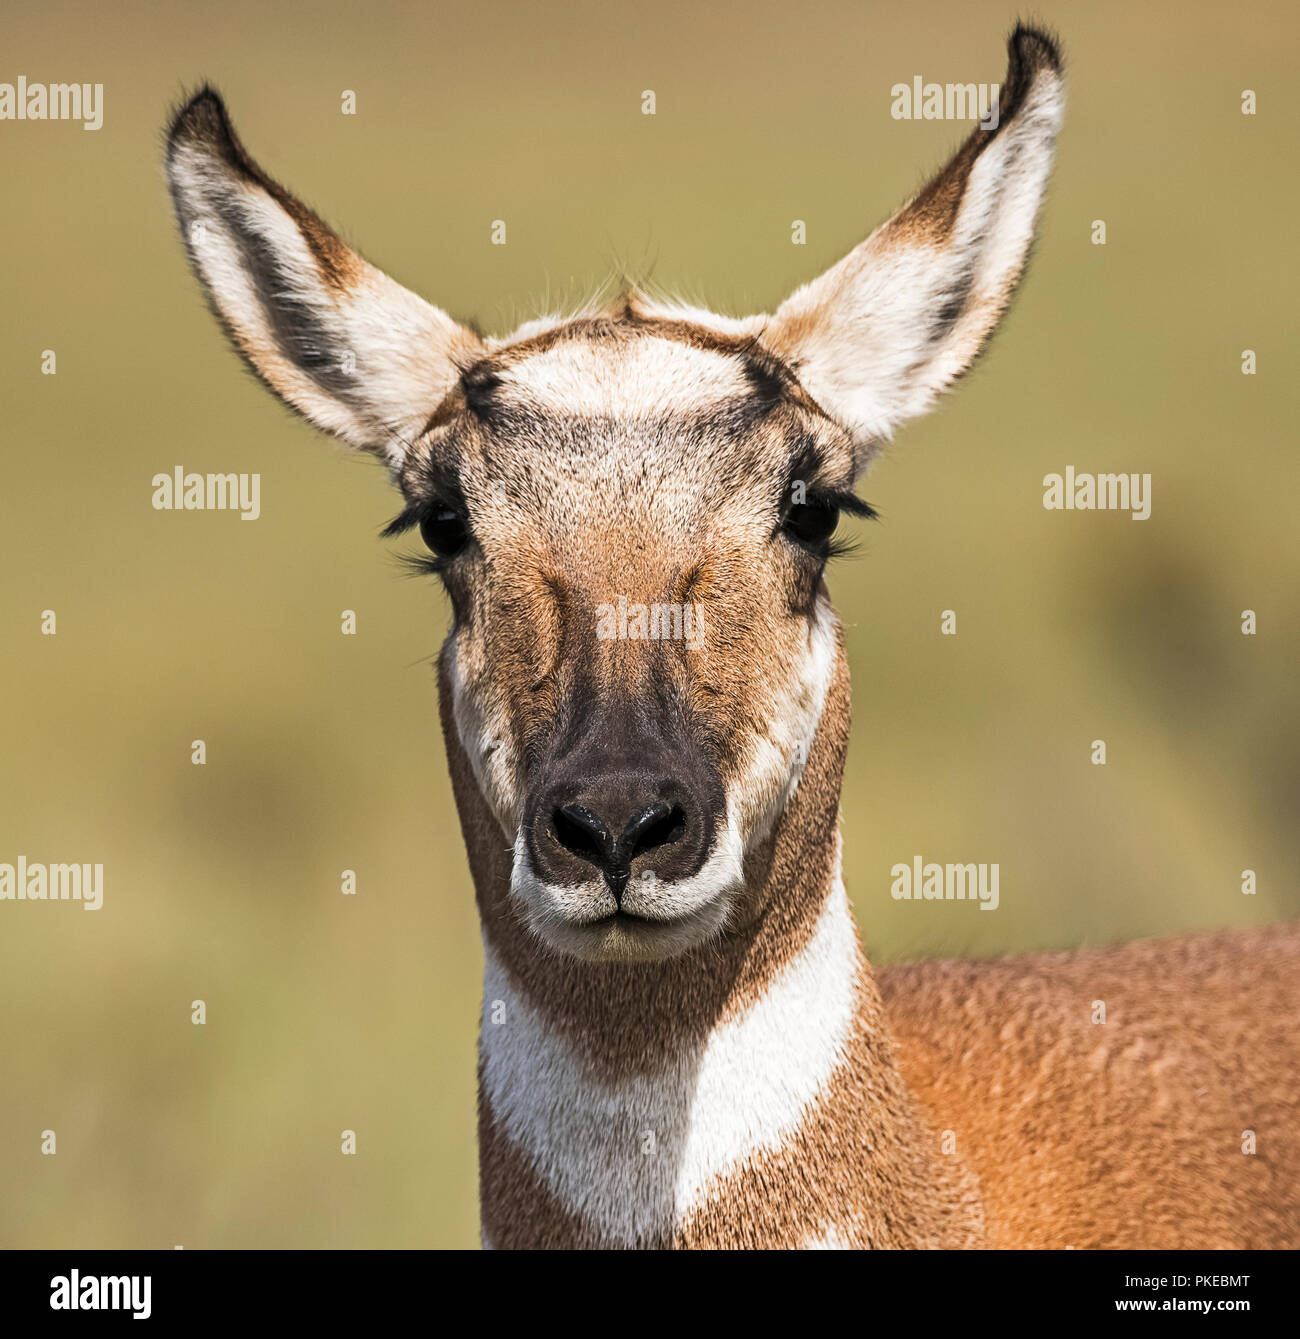 Close-up portrait of a Pronghorn (Antilocapra americana) looking at the camera; Utah, United States of America Stock Photo